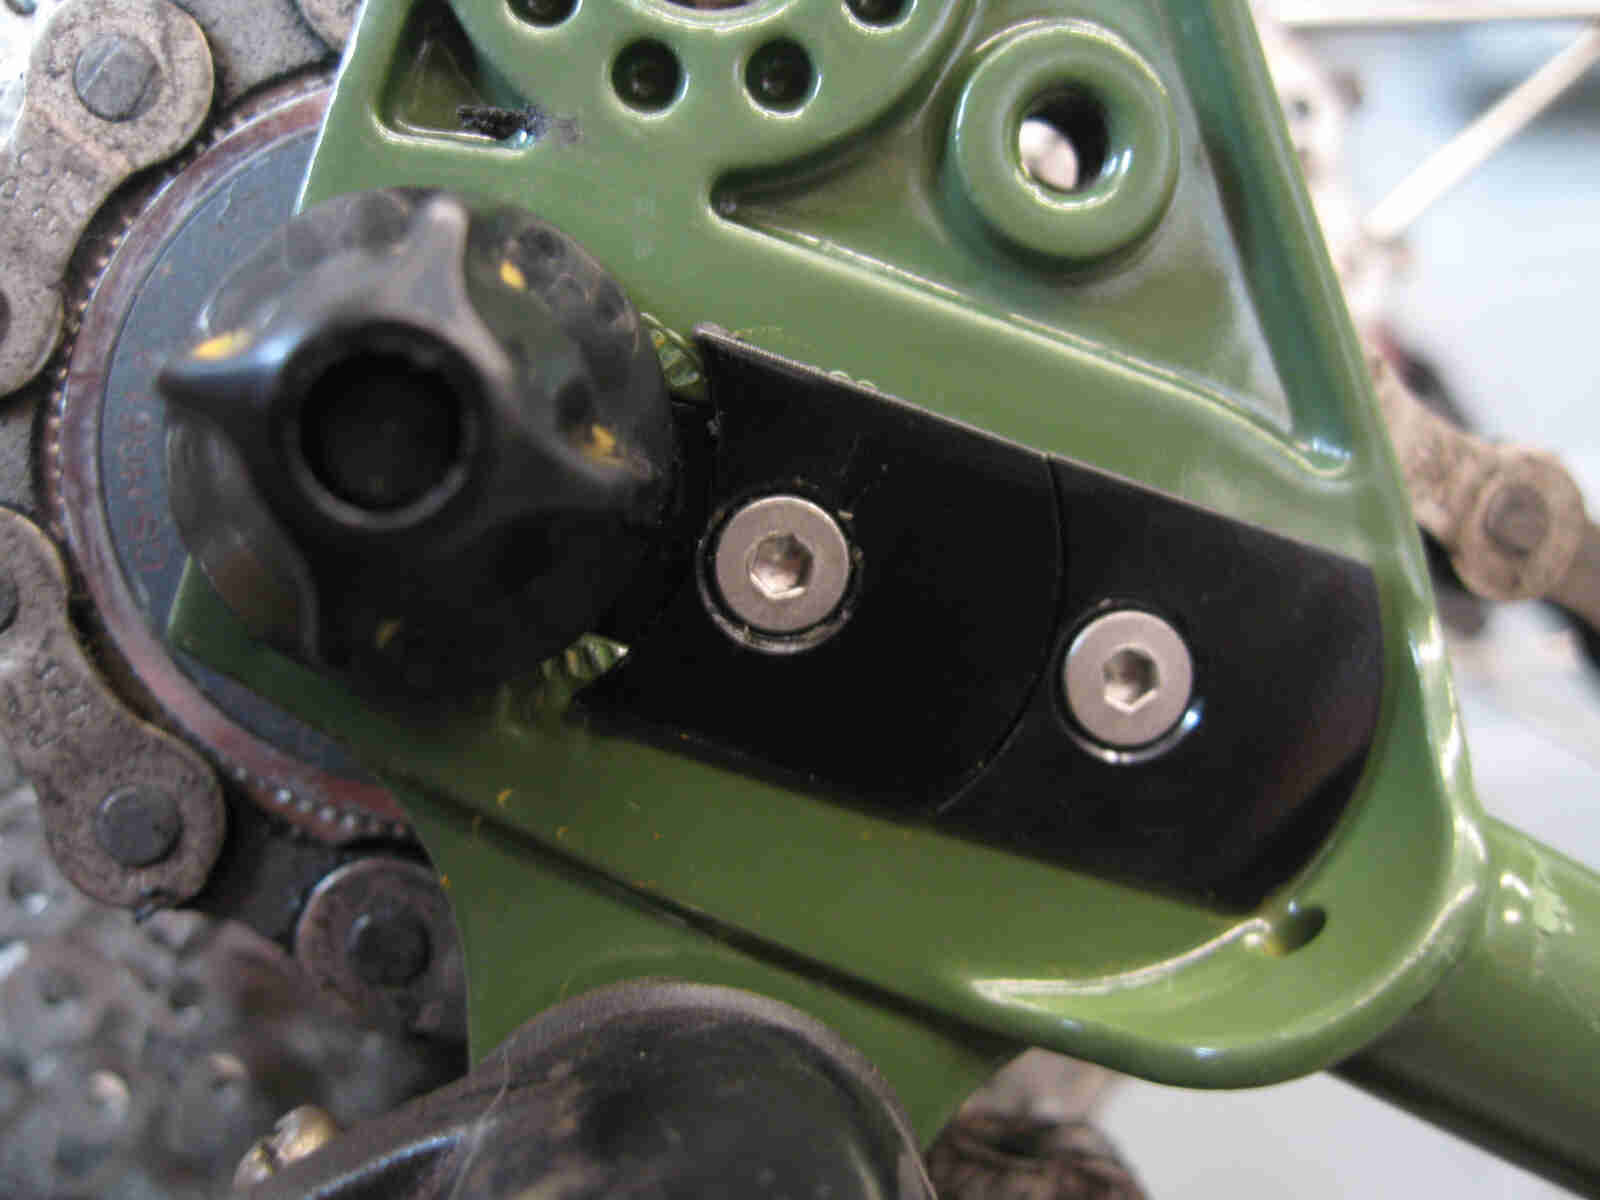 Surly Ogre bike - green - dropout with Monkey Nut detail - right side close up view